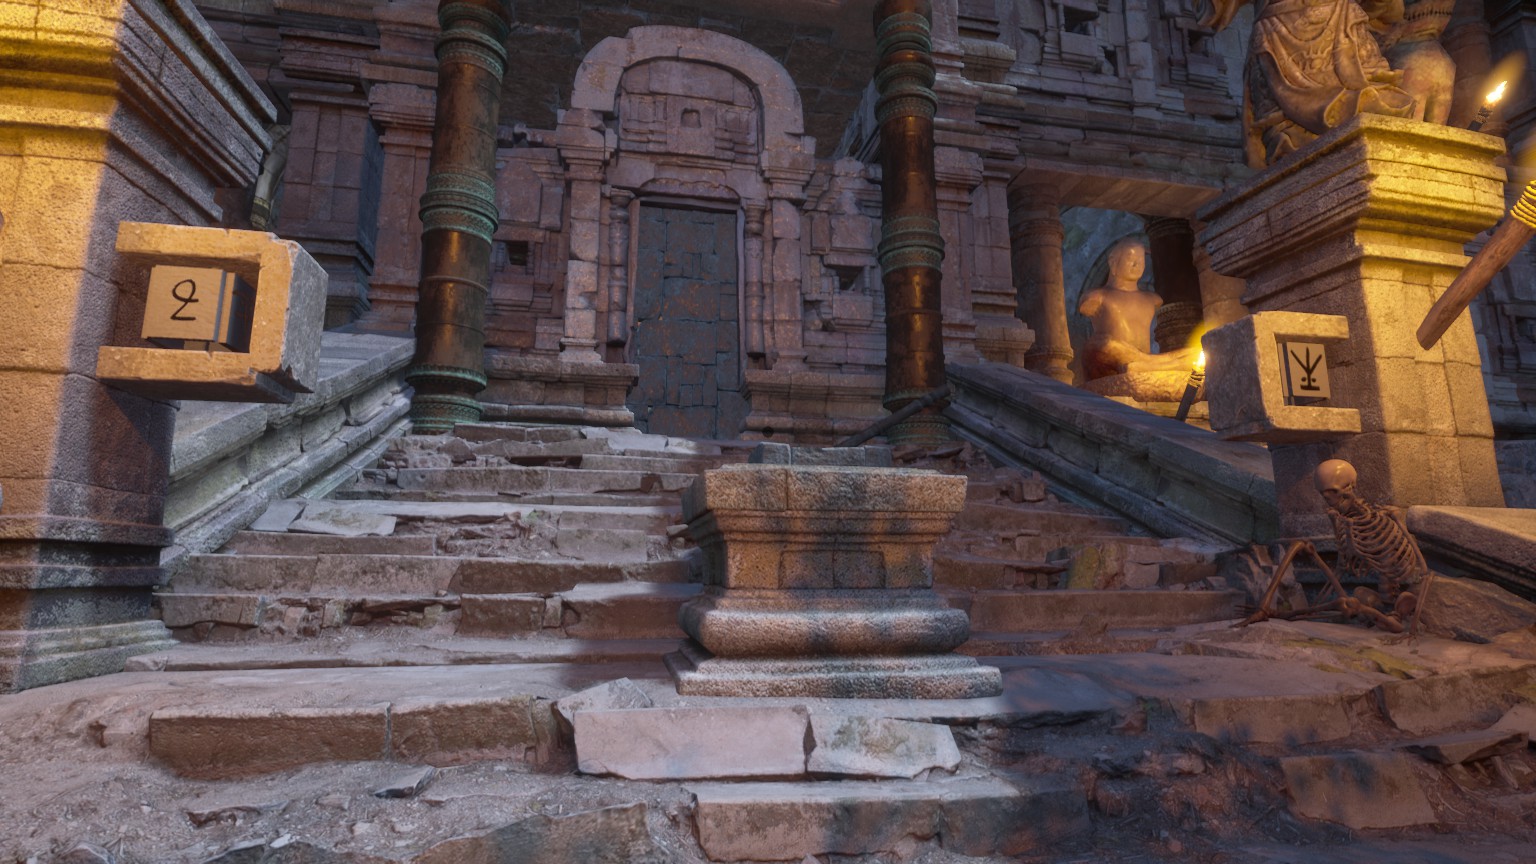 stone steps leading up to a ancient door. the player must activate two pillars by changing the symbols.